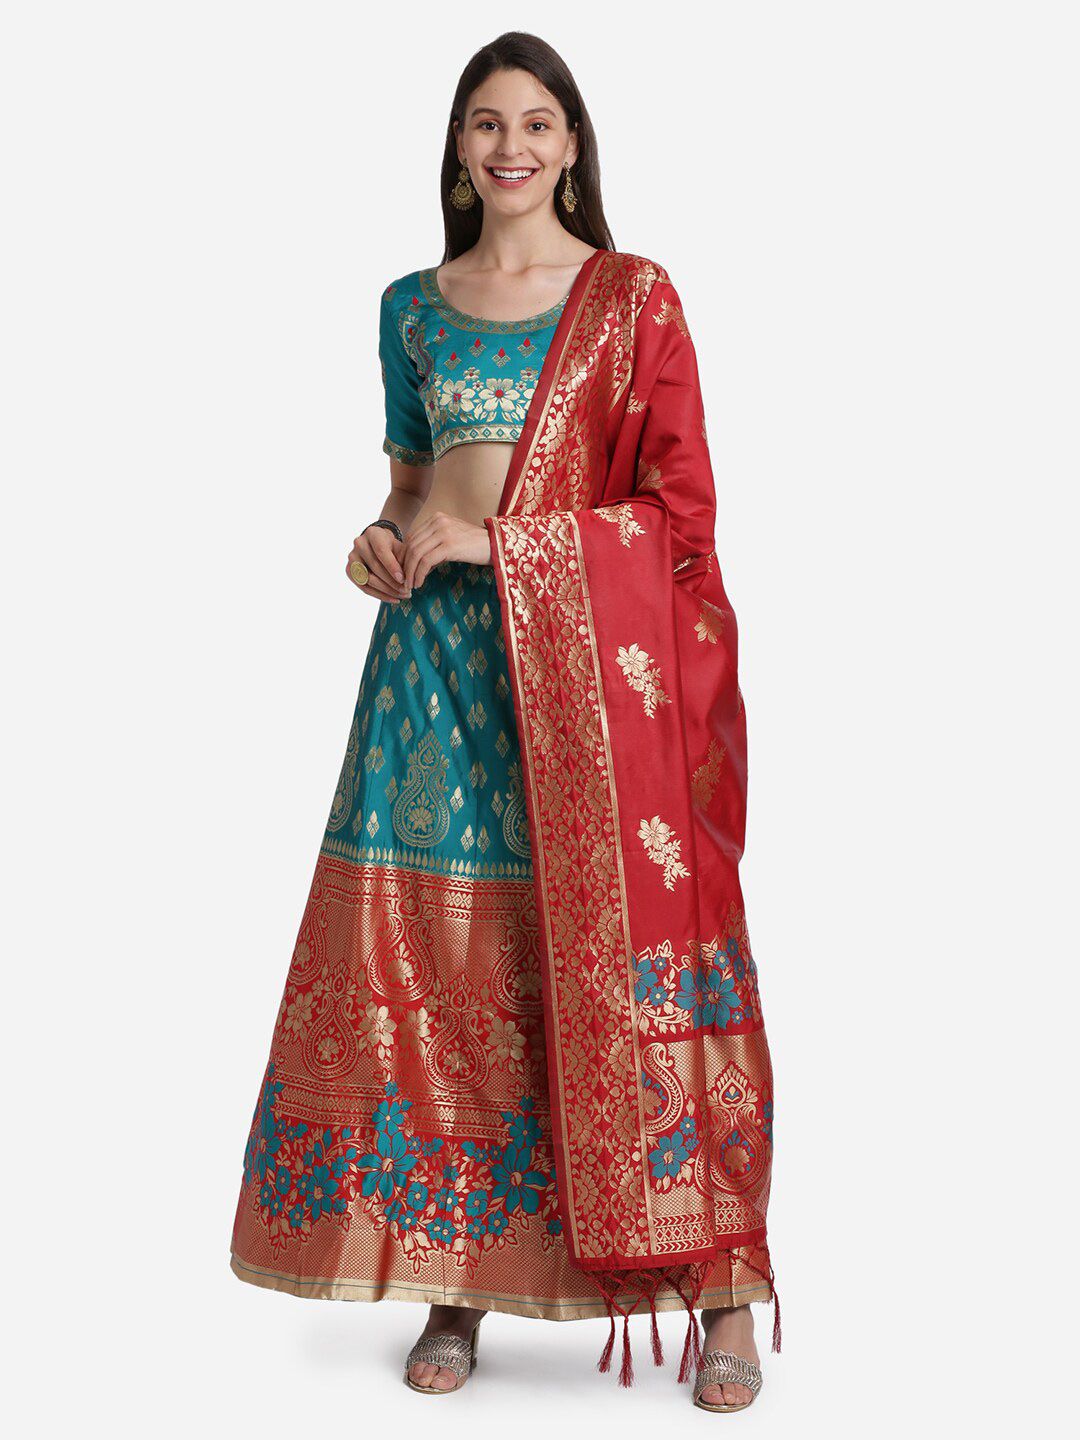 Mitera Women Turquoise Blue & Red Semi-Stitched Lehenga & Unstitched Blouse with Dupatta Price in India